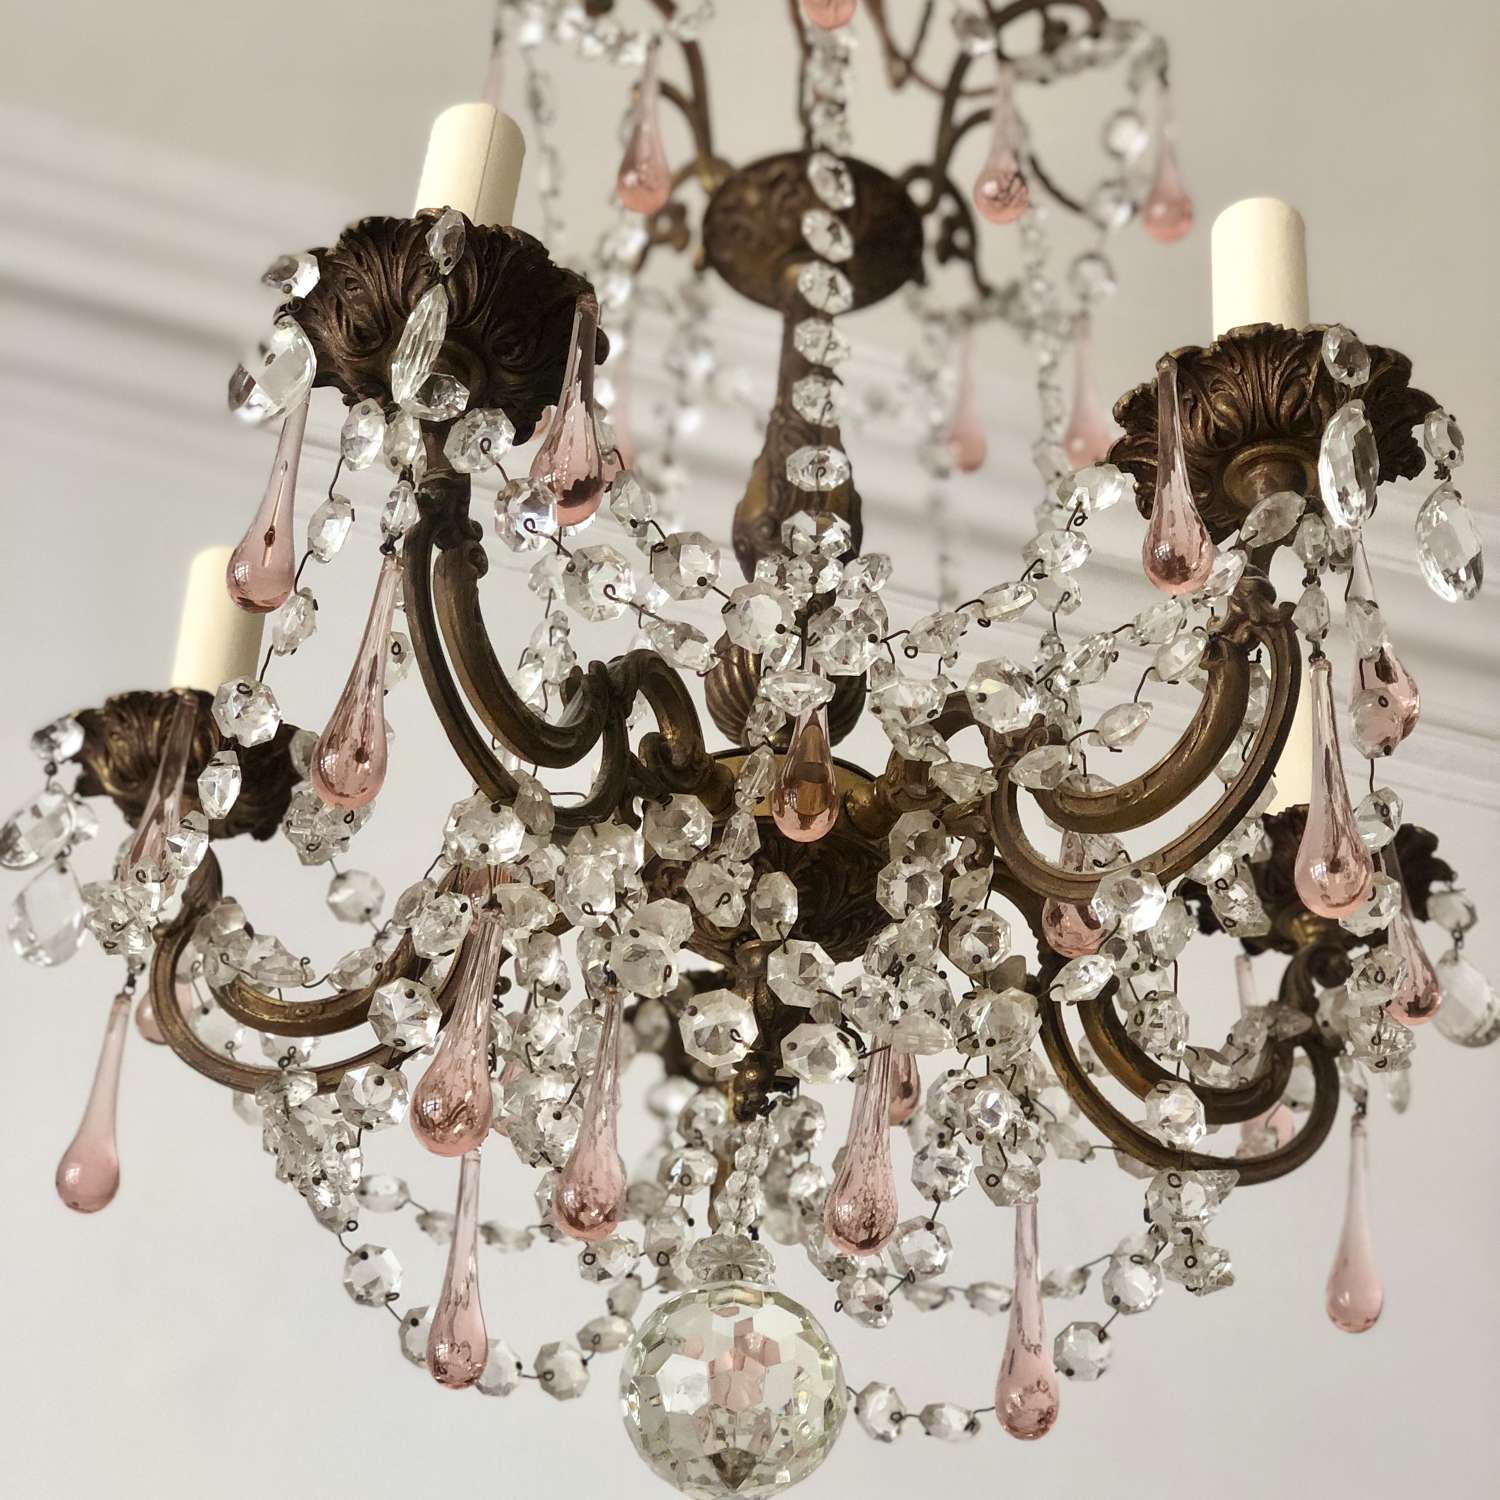 Antique French crystal chandelier